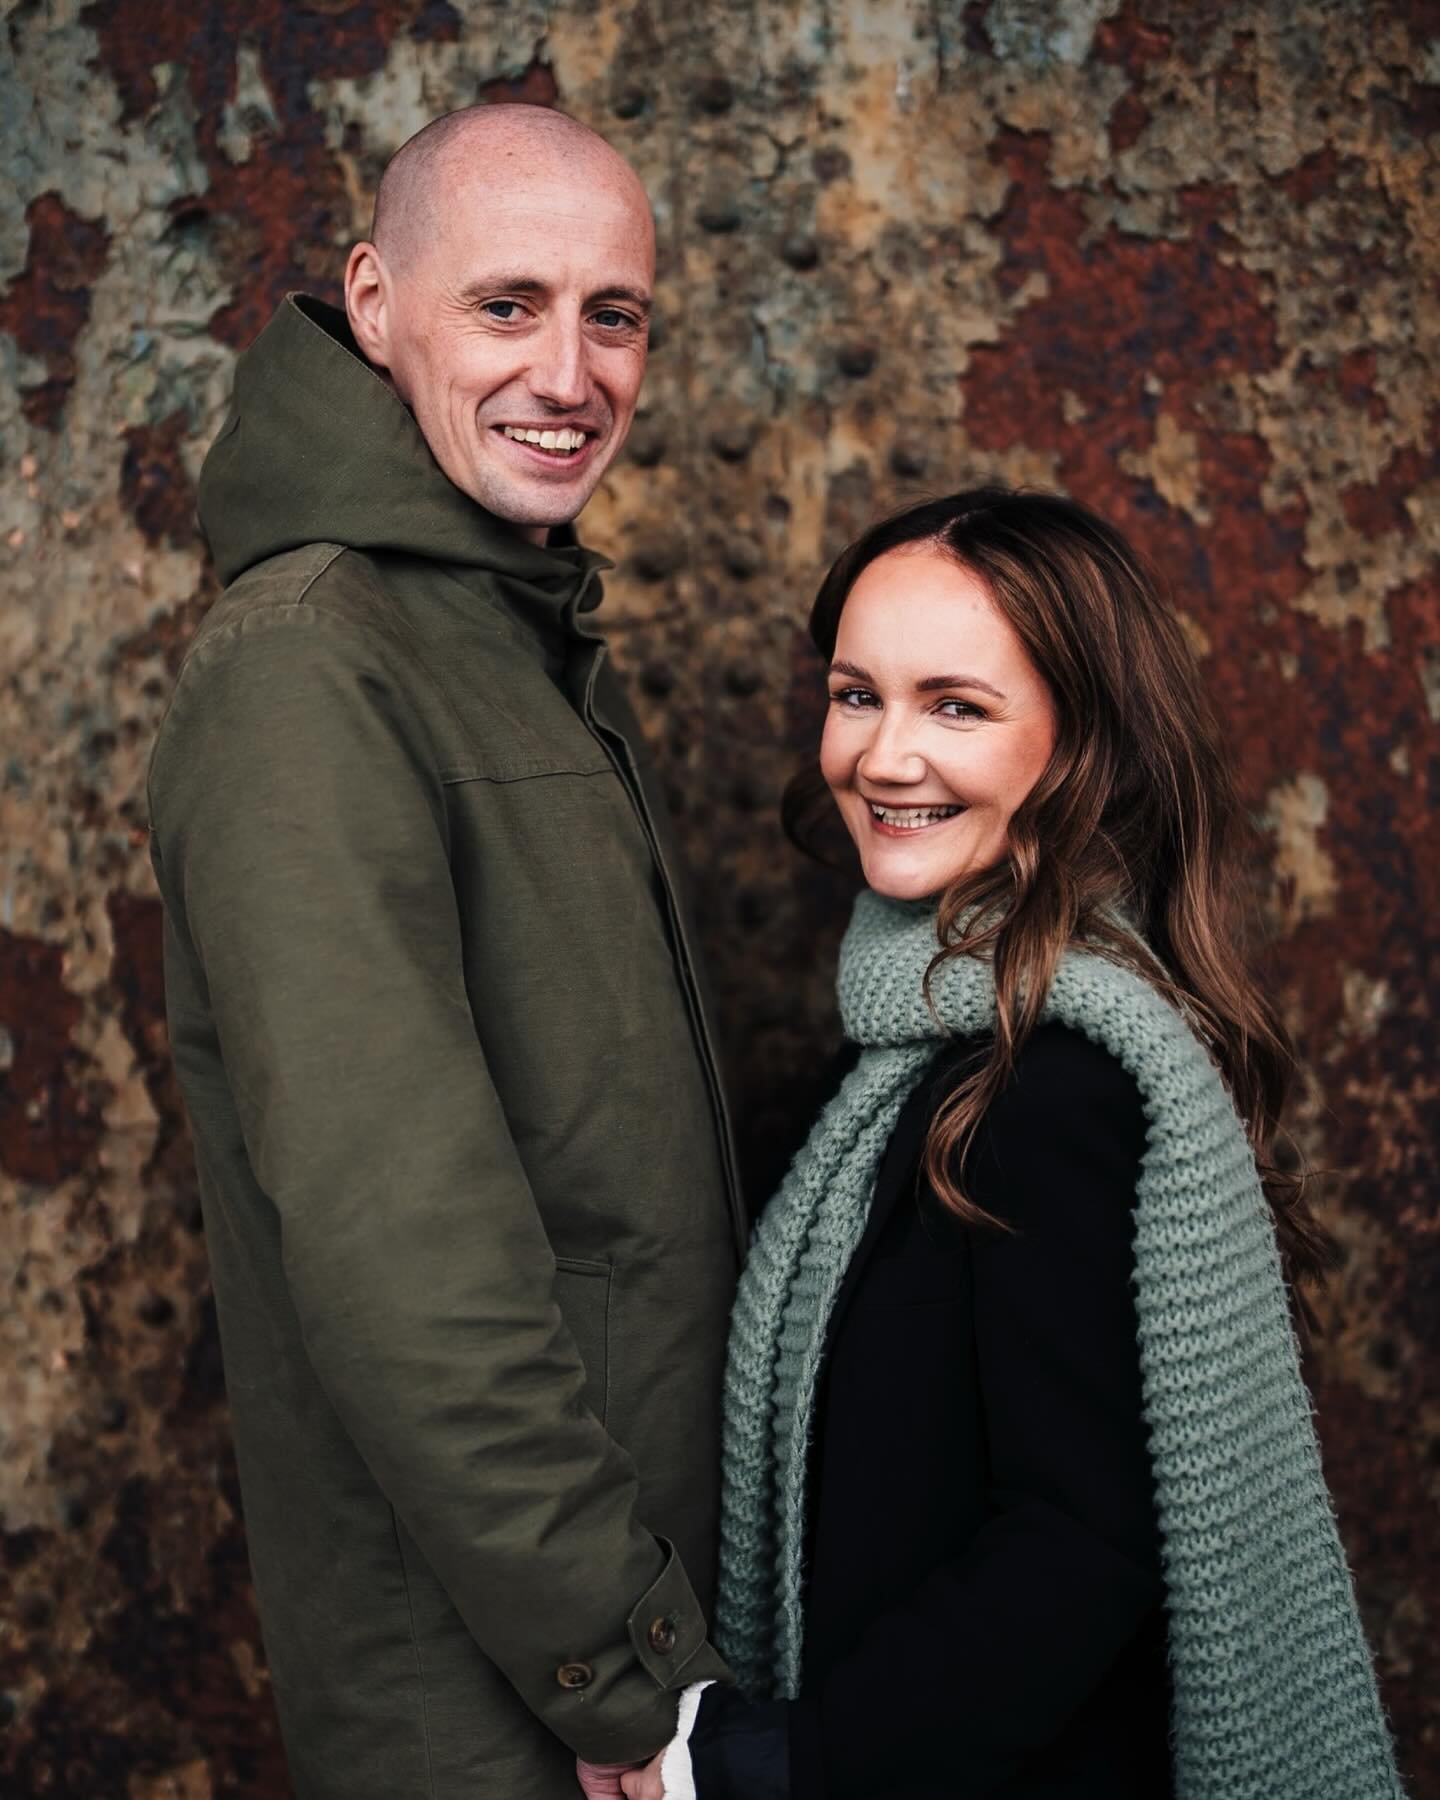 Today&rsquo;s the big day for Natalie and Grant- buzzing to shoot their wedding at @dalmenyparkhotel 

We met up at the weekend and had a coffee and a walk around the sugar sheds in a very rainy (surprise) Greenock.

Looking forward to my day with @l